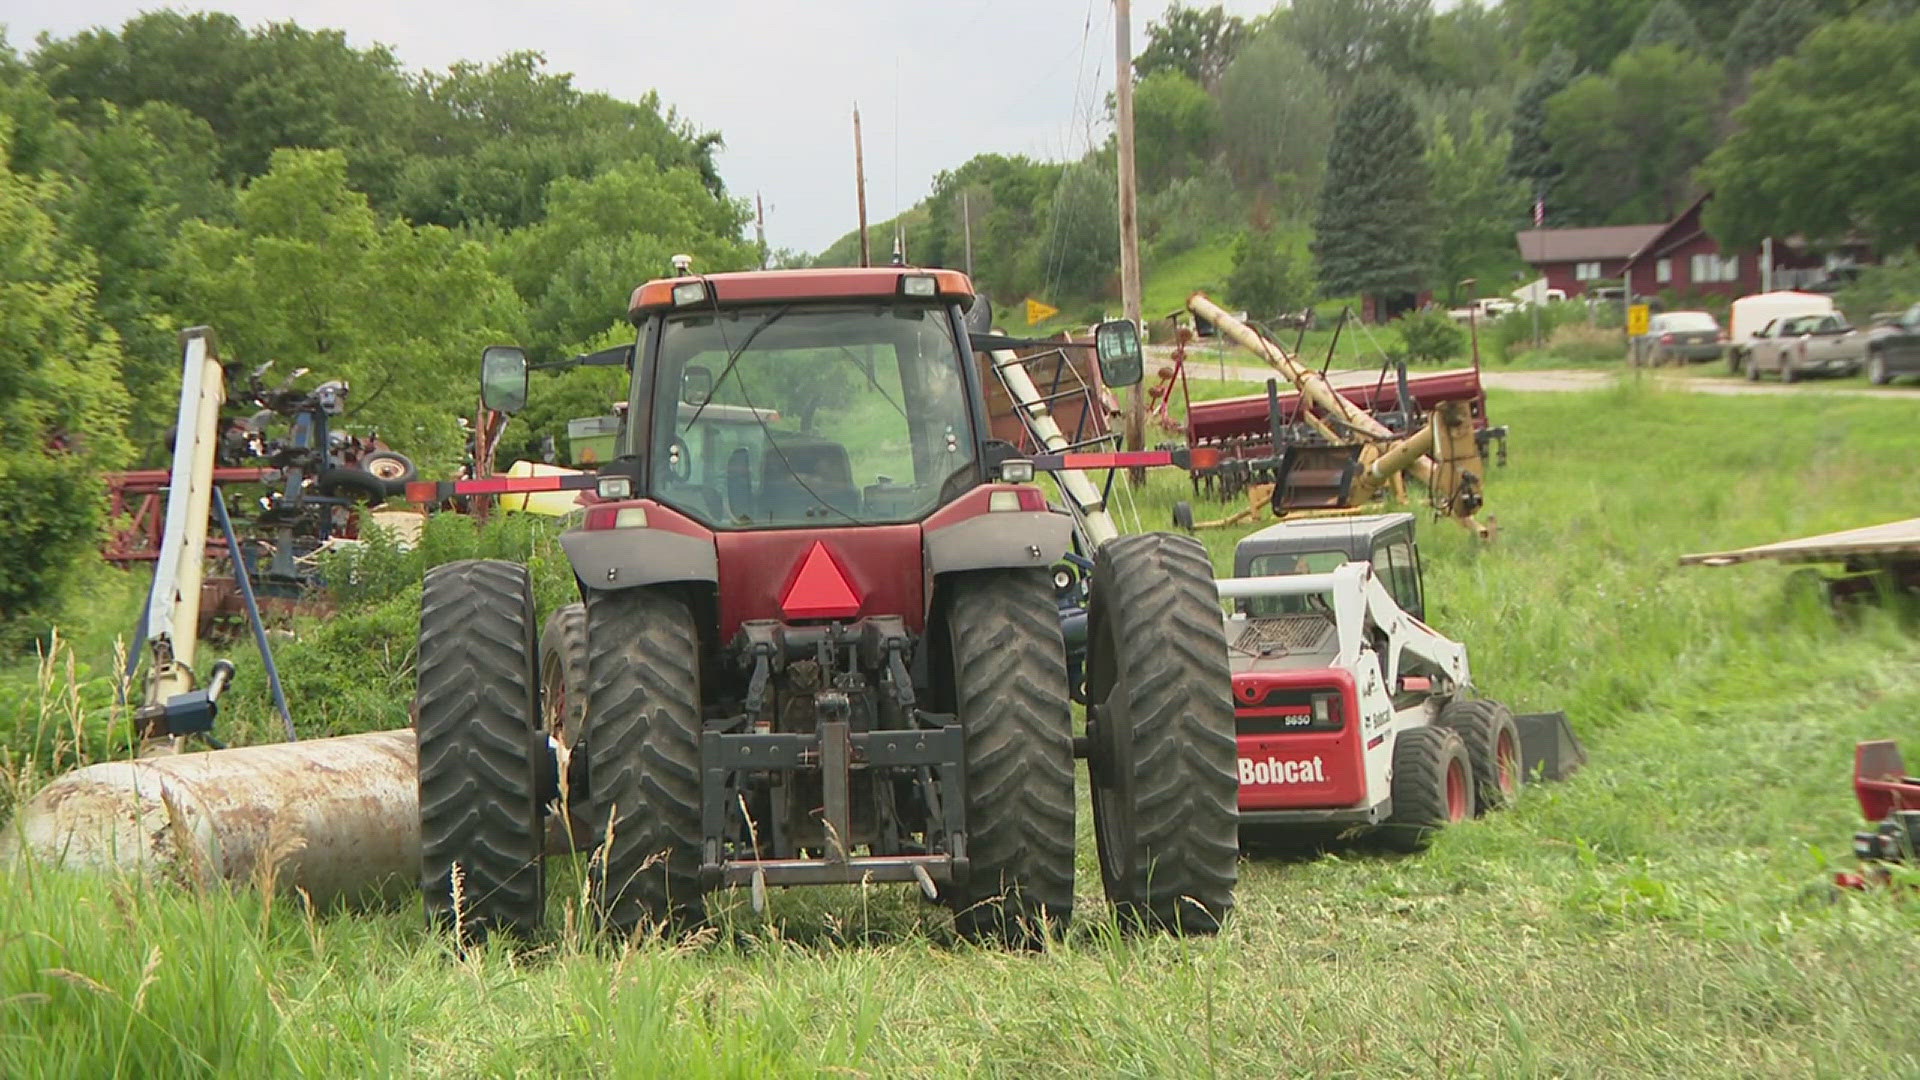 One family that lives along the Little Sioux River hopes their fields of corn, soybeans and alfalfa survive as floodwaters surge out of their banks.